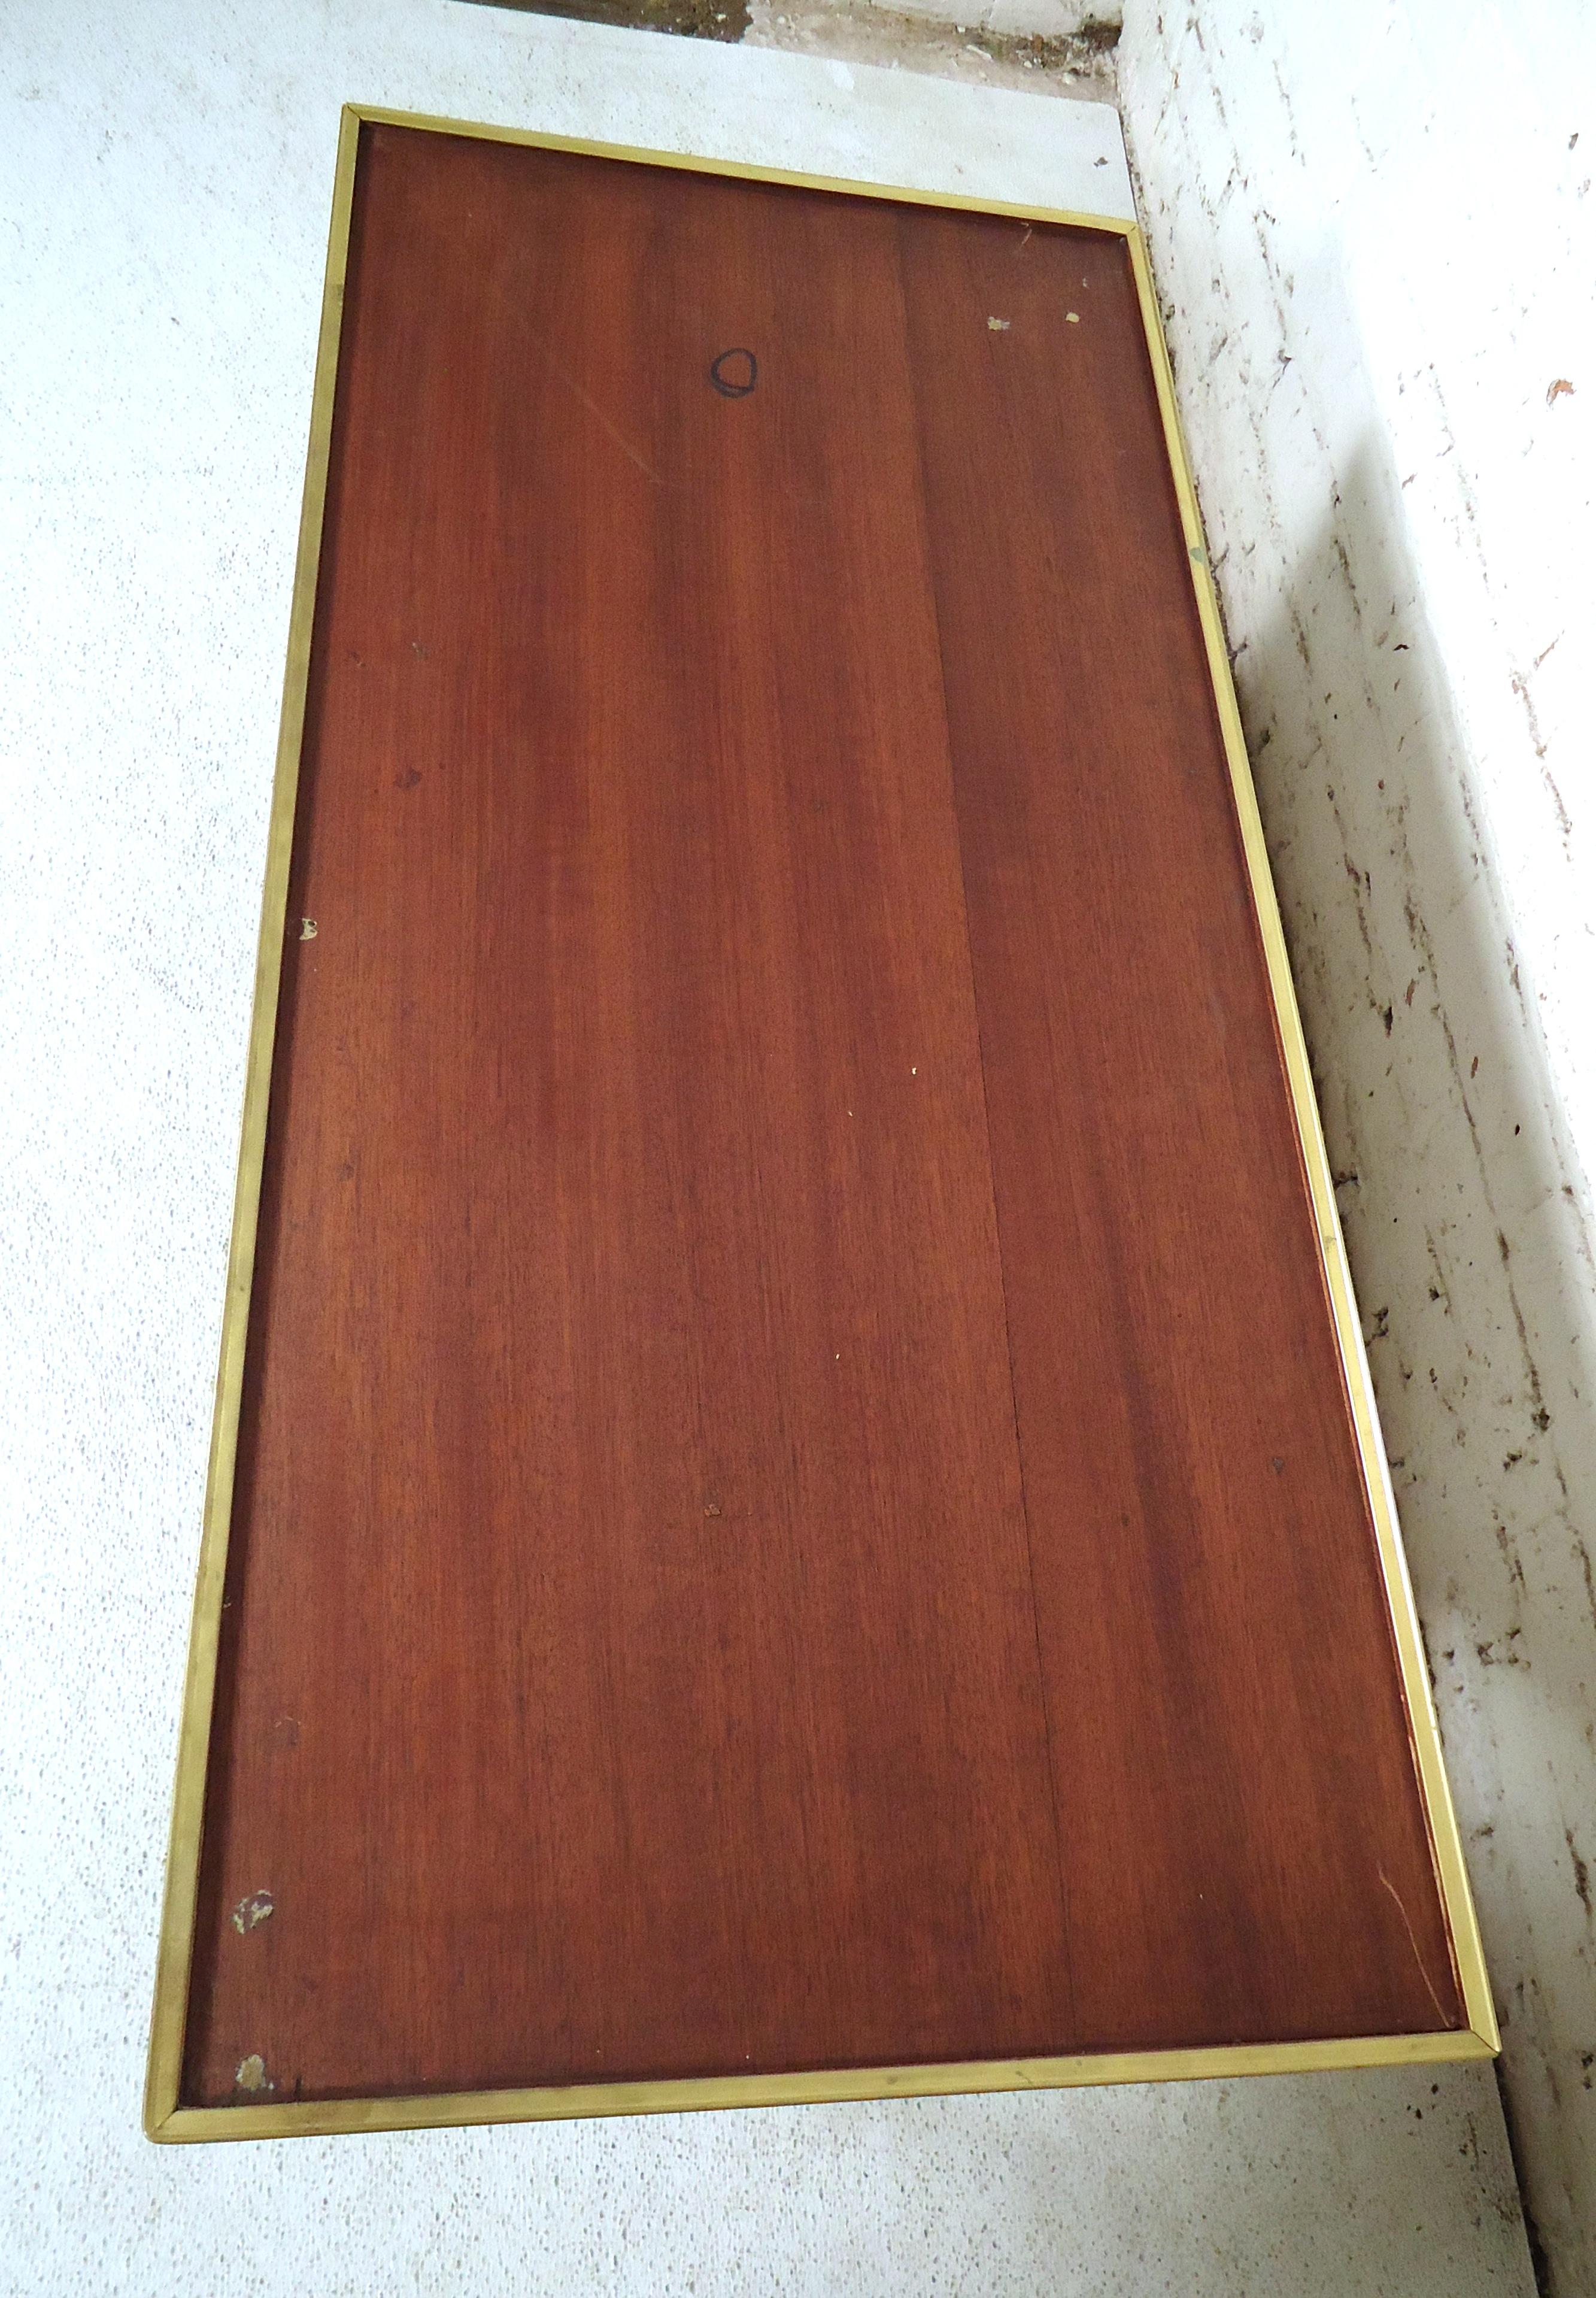 Vintage modern coffee table featuring rich walnut grain, brass frame and legs.

Please confirm item location (NY or NJ.)